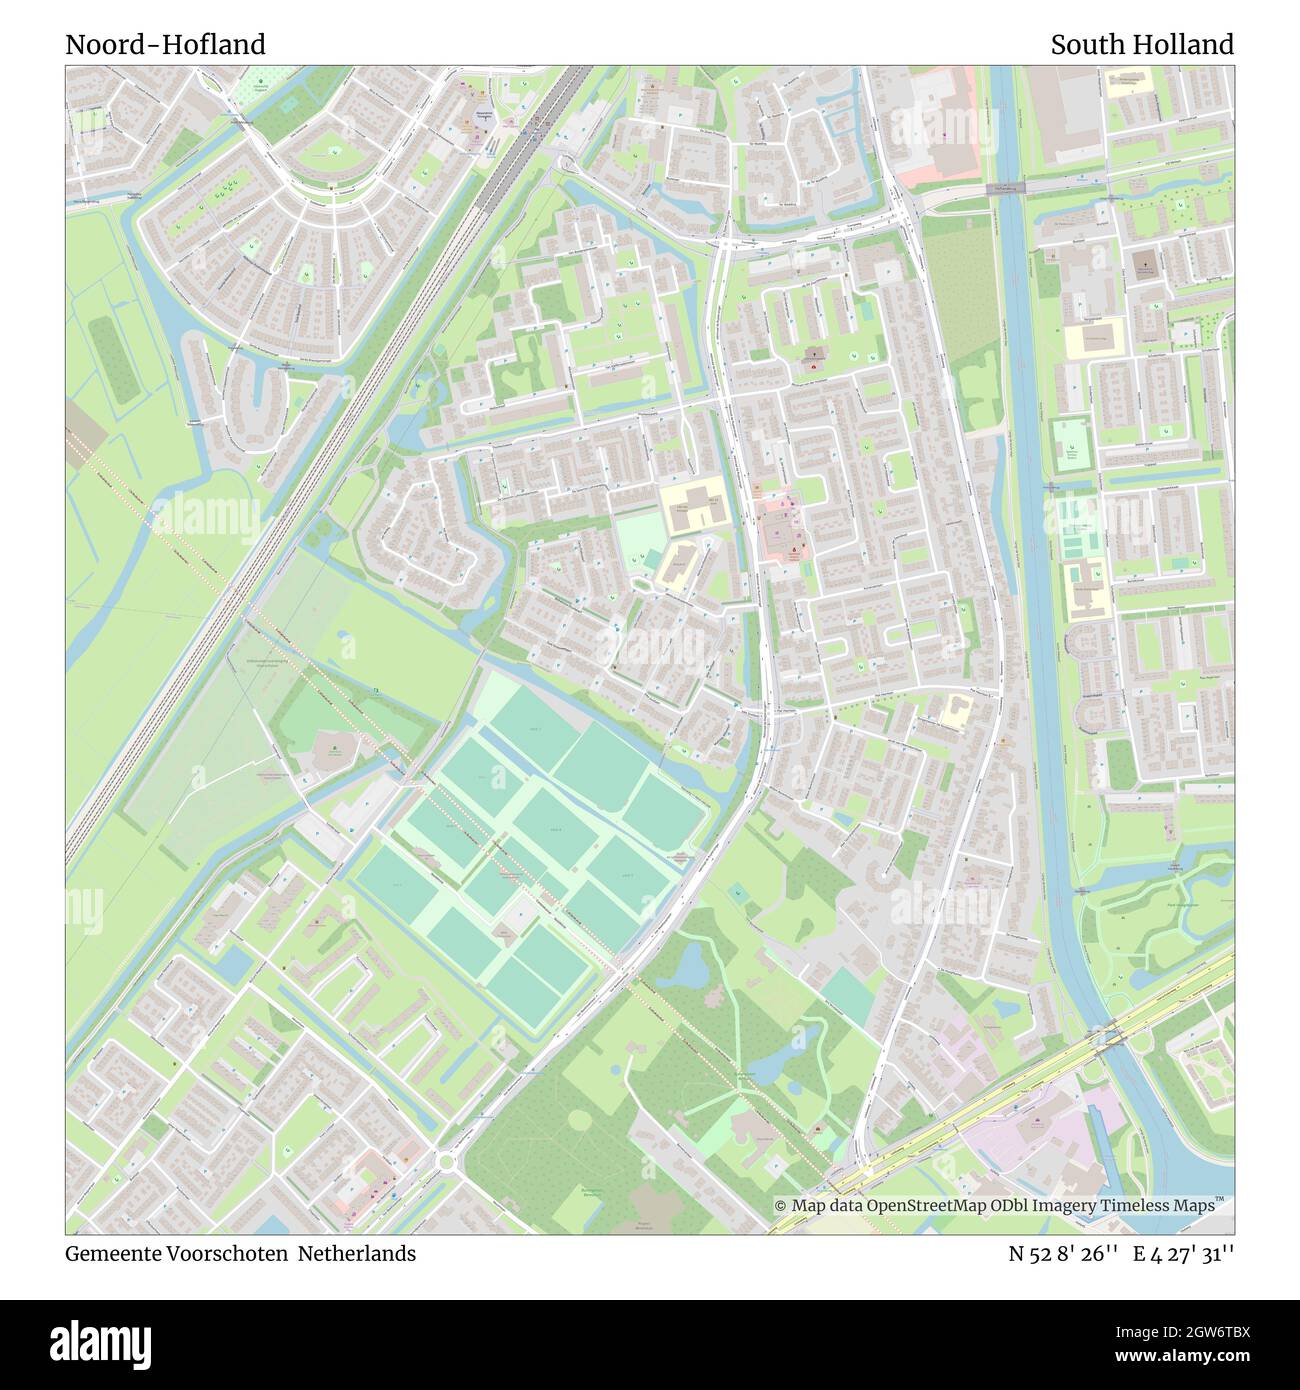 Noord-Hofland, Gemeente Voorschoten, Netherlands, South Holland, N 52 8' 26'', E 4 27' 31'', map, Timeless Map published in 2021. Travelers, explorers and adventurers like Florence Nightingale, David Livingstone, Ernest Shackleton, Lewis and Clark and Sherlock Holmes relied on maps to plan travels to the world's most remote corners, Timeless Maps is mapping most locations on the globe, showing the achievement of great dreams Stock Photo